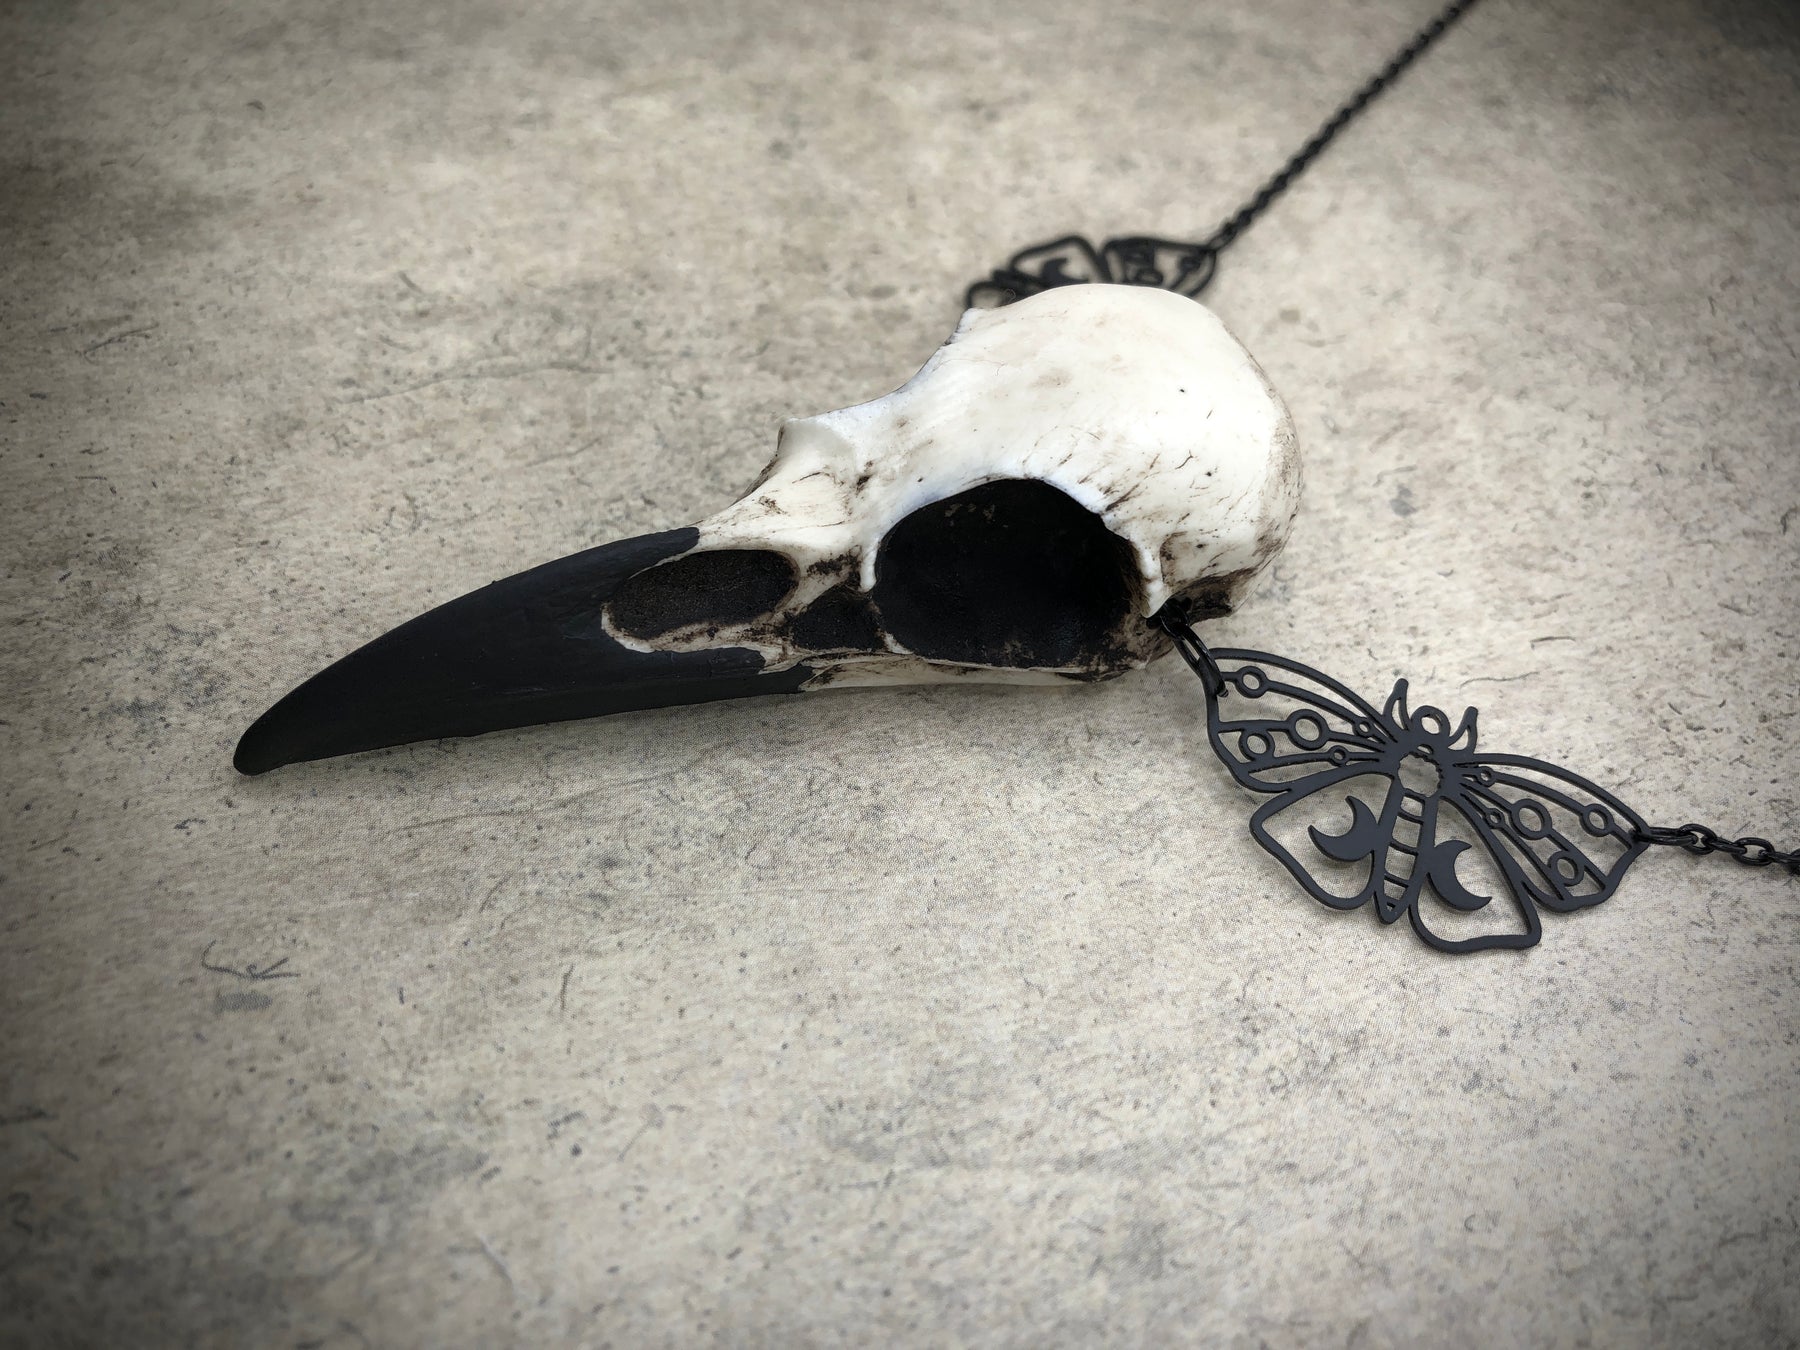 Left view of bone jewelry luna moth raven skull necklace featuring black crescent moon moth charms and a realistic resin bird skull.